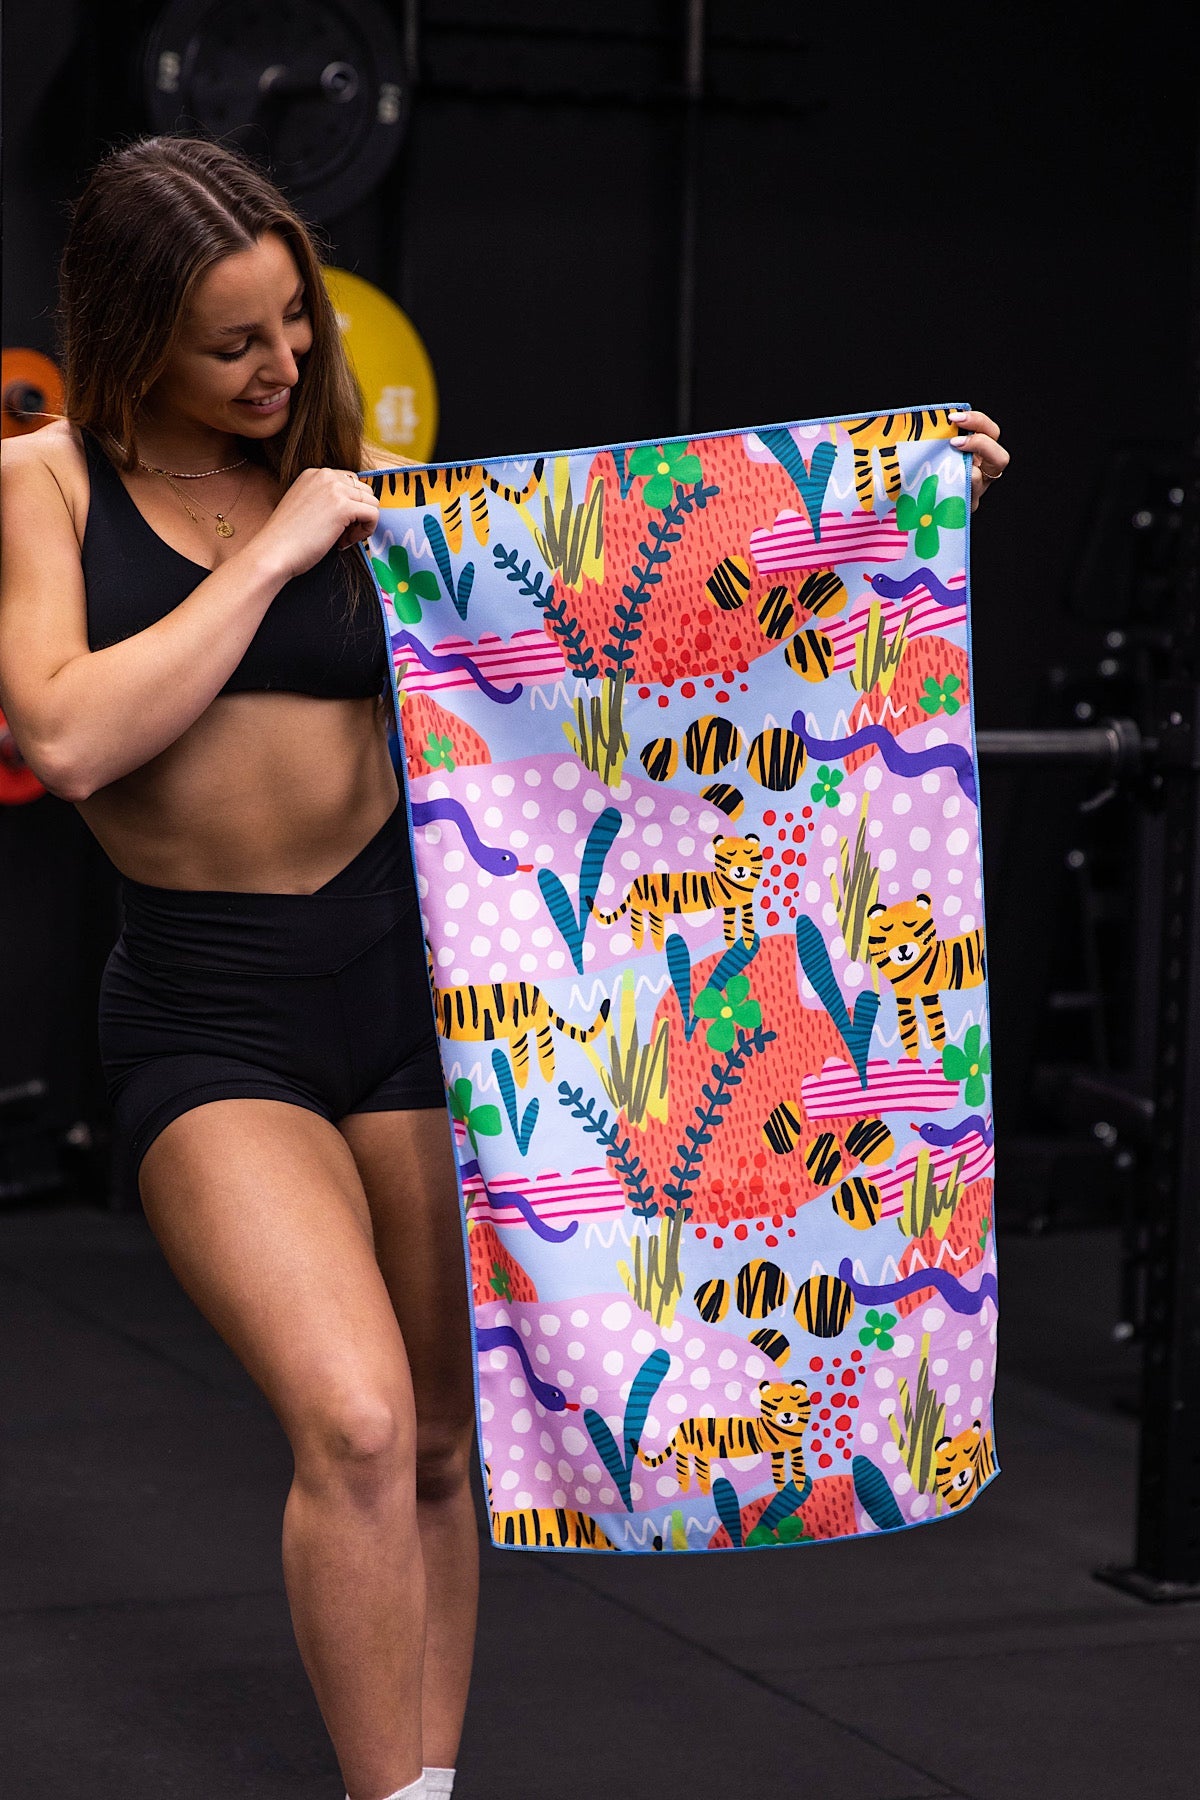 Here's why you need a Cheeky Winx towel 😎🌈💪 #gym #fitness #workout  #roleplay #novelty #sloths #smallbusiness #gymmotivation #